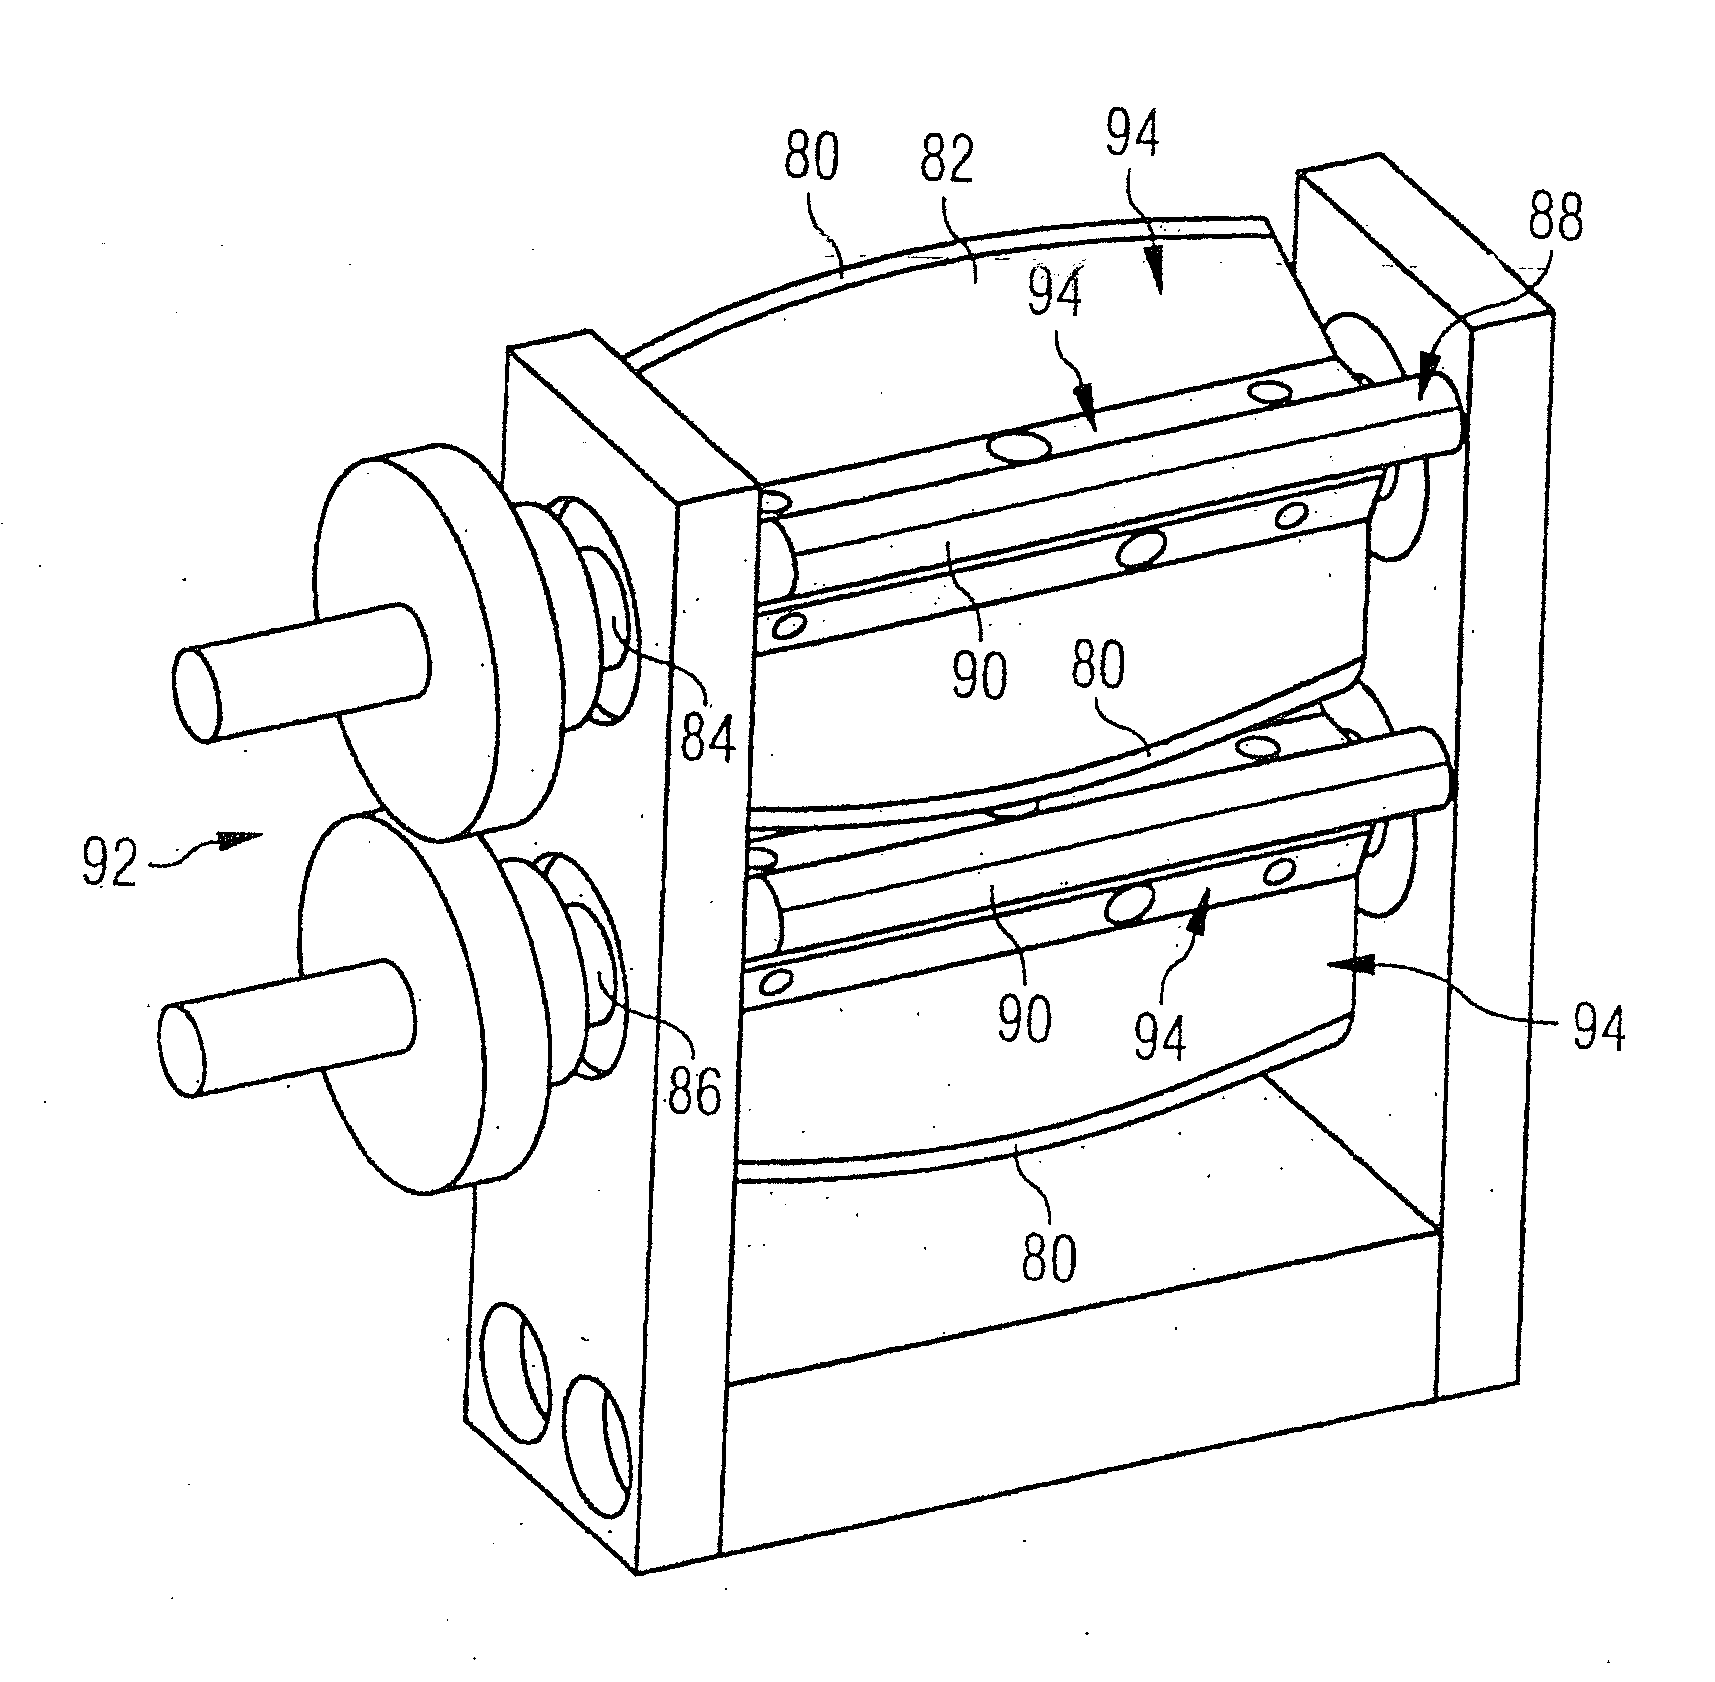 Spreading device for spreading out fiber filament bundles and spreading method carried out using the same